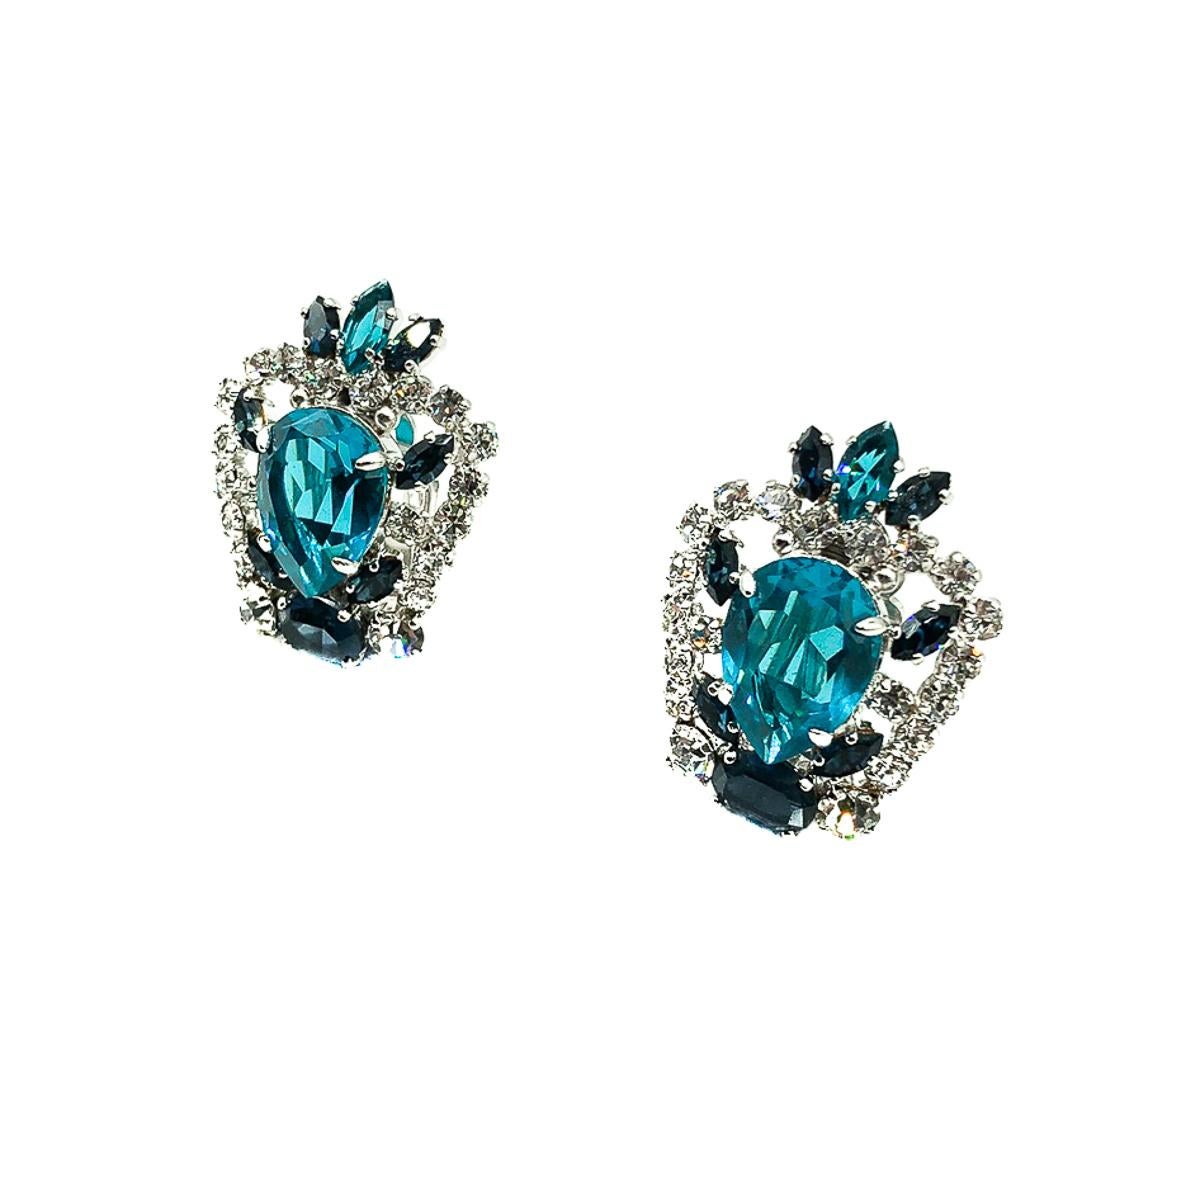 A pair of Vintage Dior Aqua Blue Earrings crafted by the House in the year of 1970 with Marc Bohan at the helm. Crafted in rhodium plated metal with an array of claw set crystals. Featuring a crown inspired design set with a large deep aqua teardrop